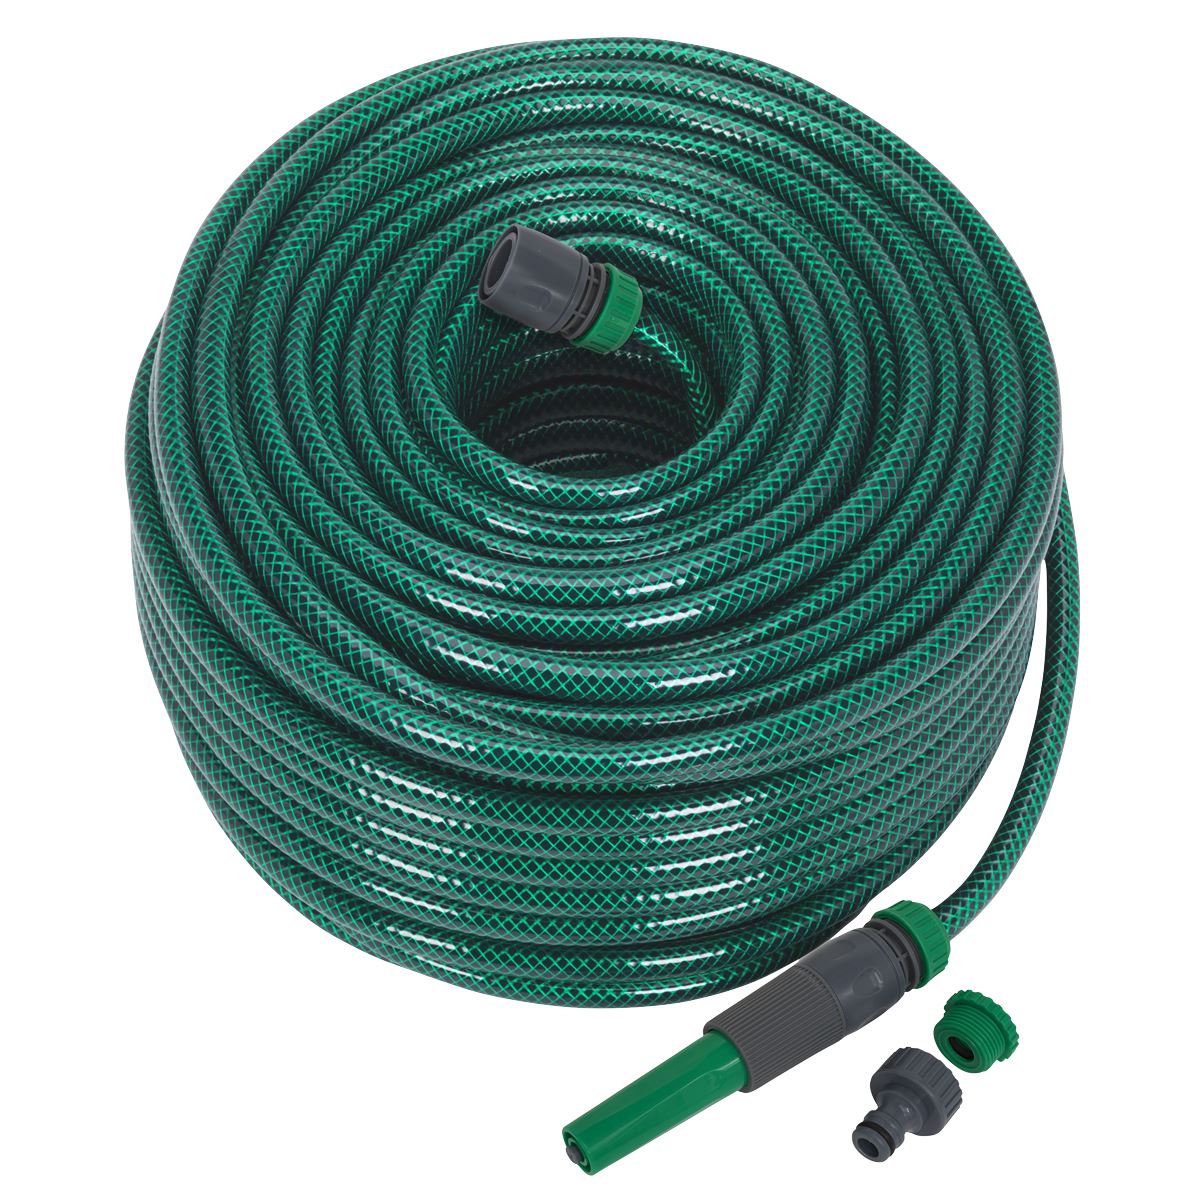 Sealey Water Hose 80m with Fittings